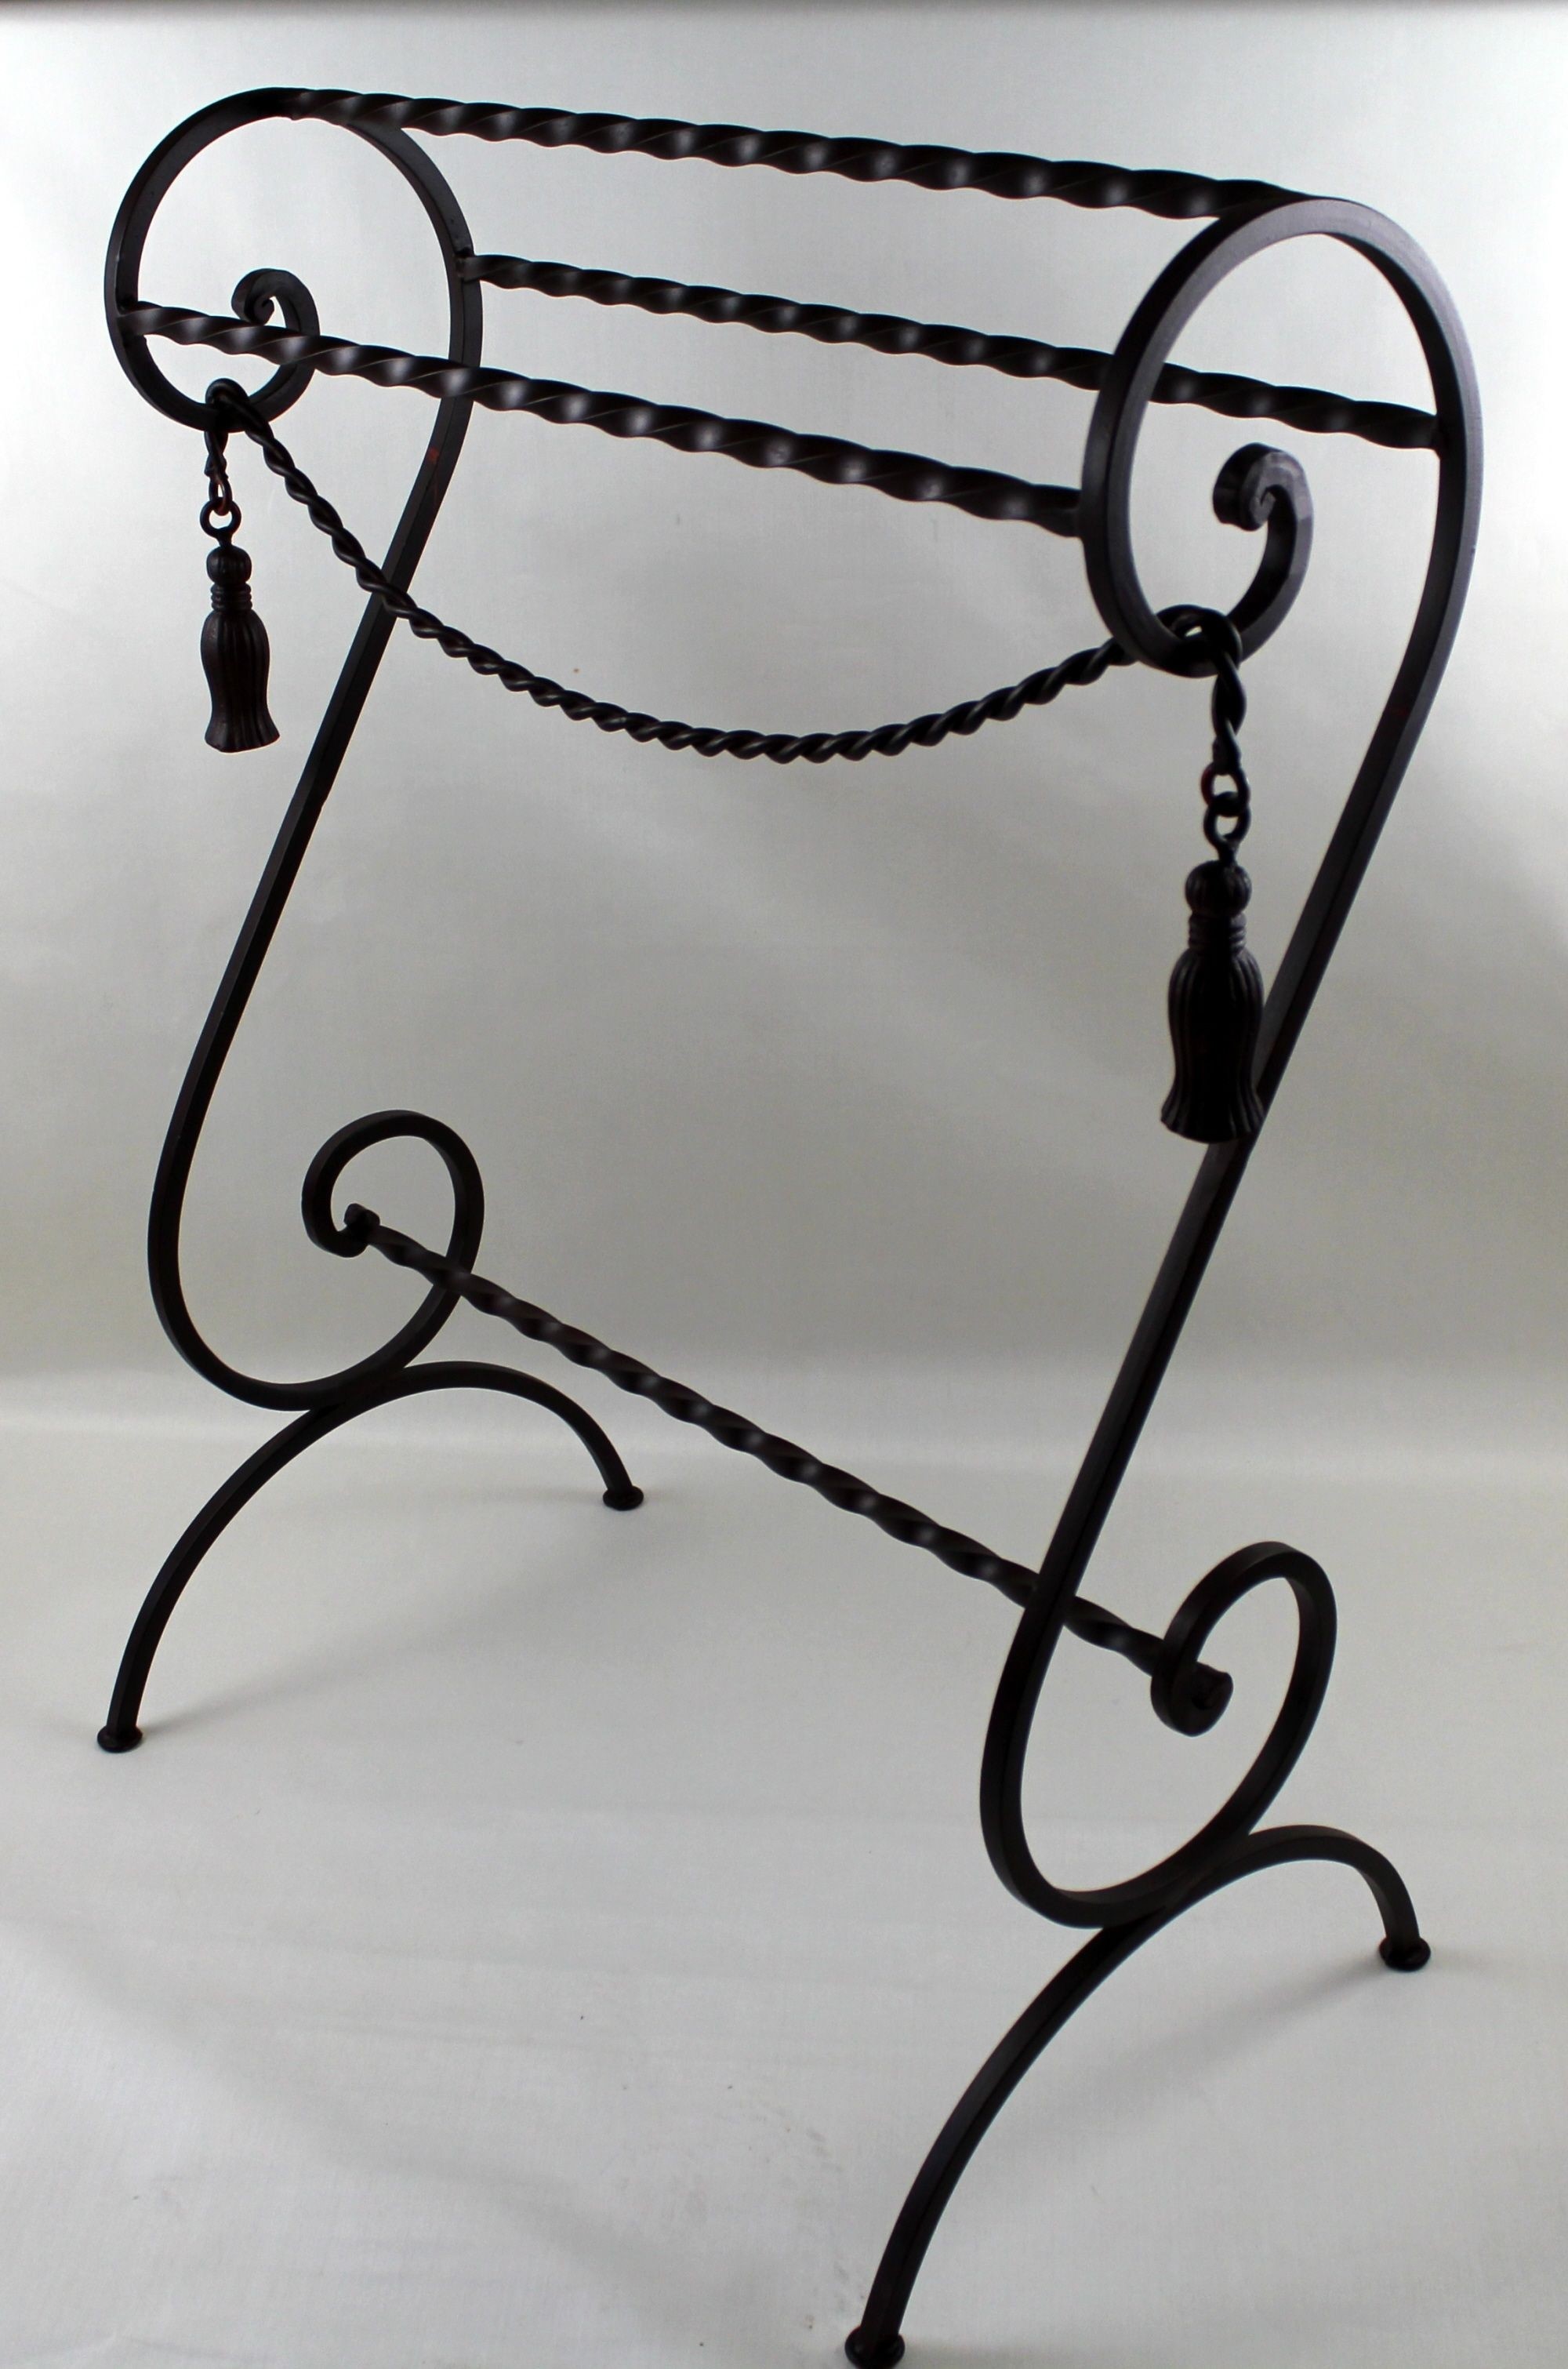 Wrought iron quilt towel rack scroll design wrought iron